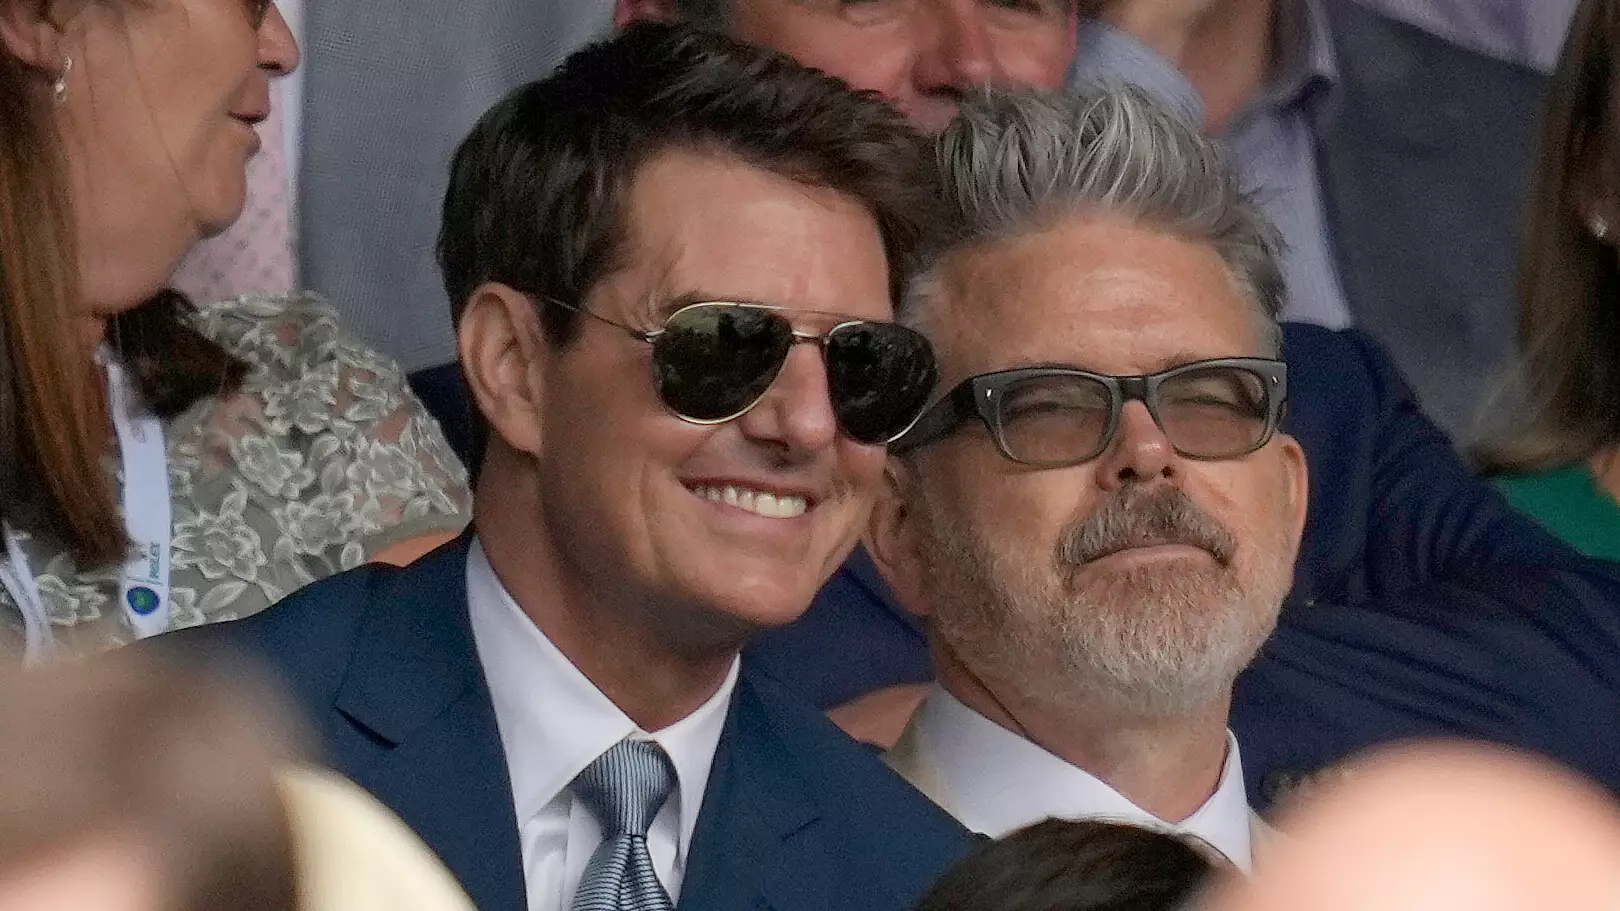 People Think Tom Cruise Has Clones After Wimbledon And Euro 2020 Final Appearances